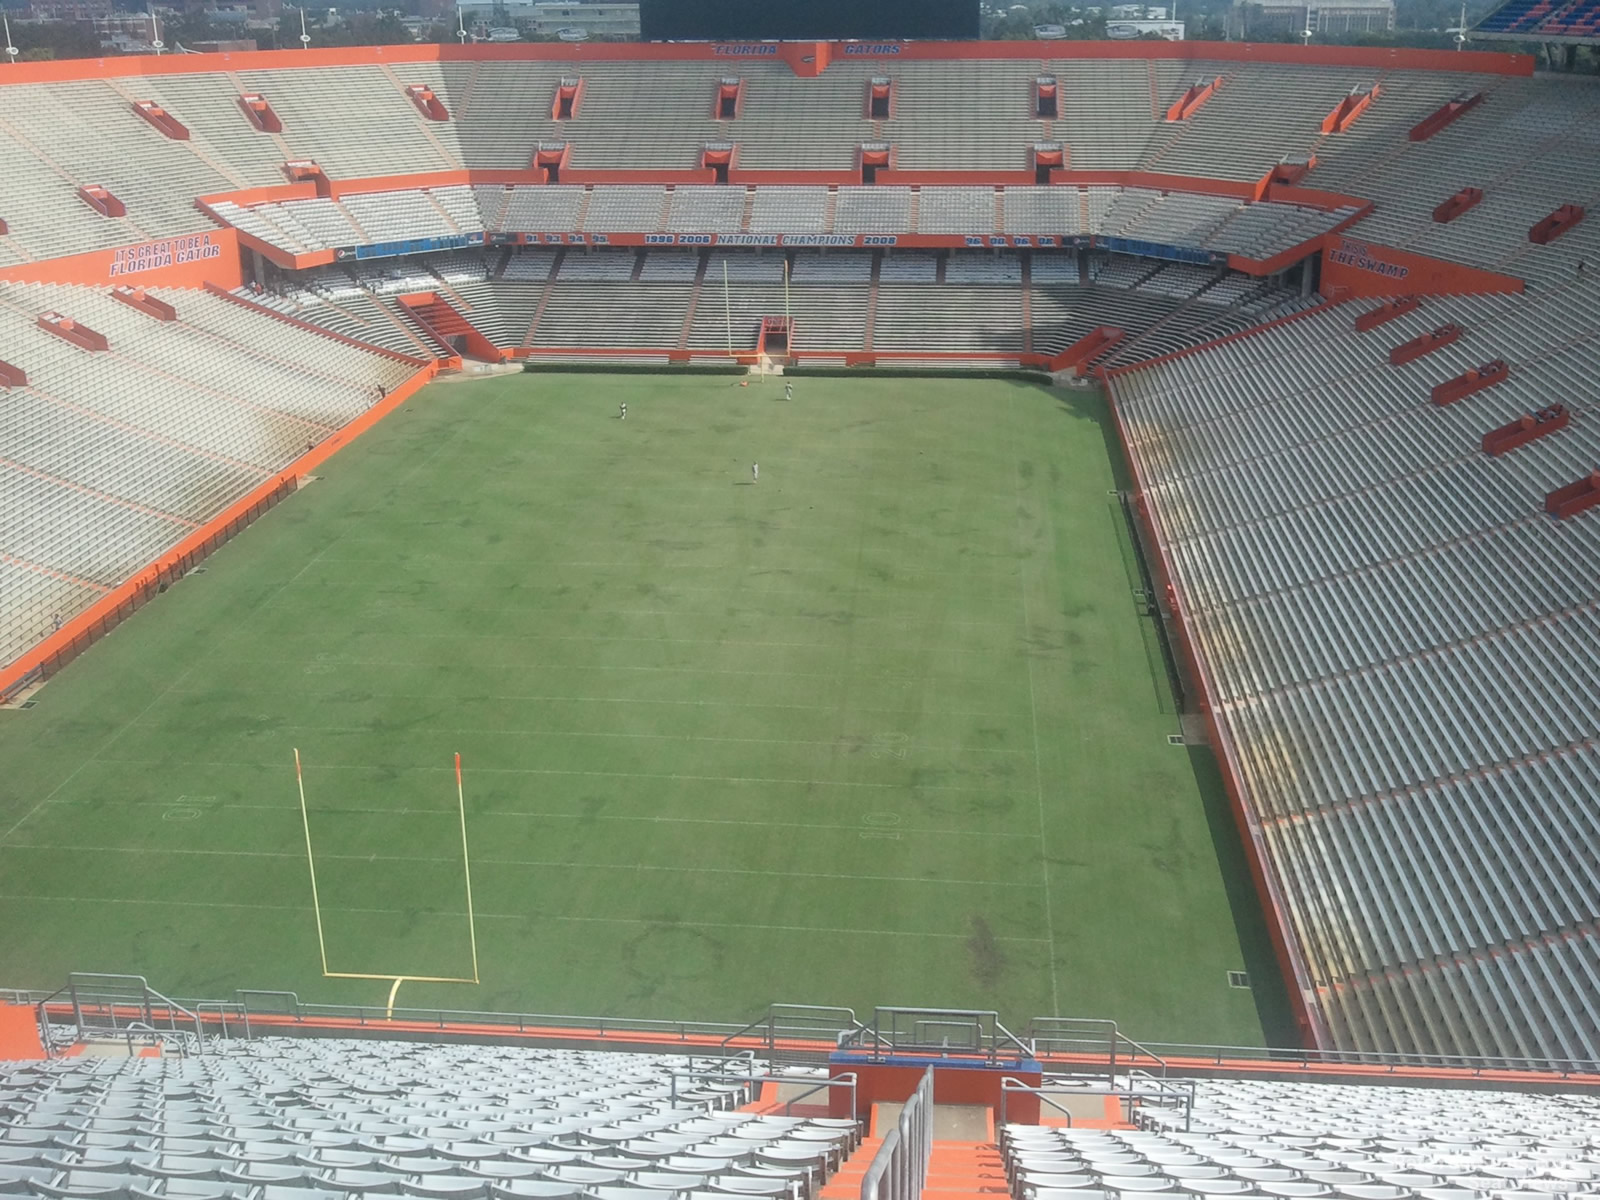 section 322, row 32 seat view  - ben hill griffin stadium